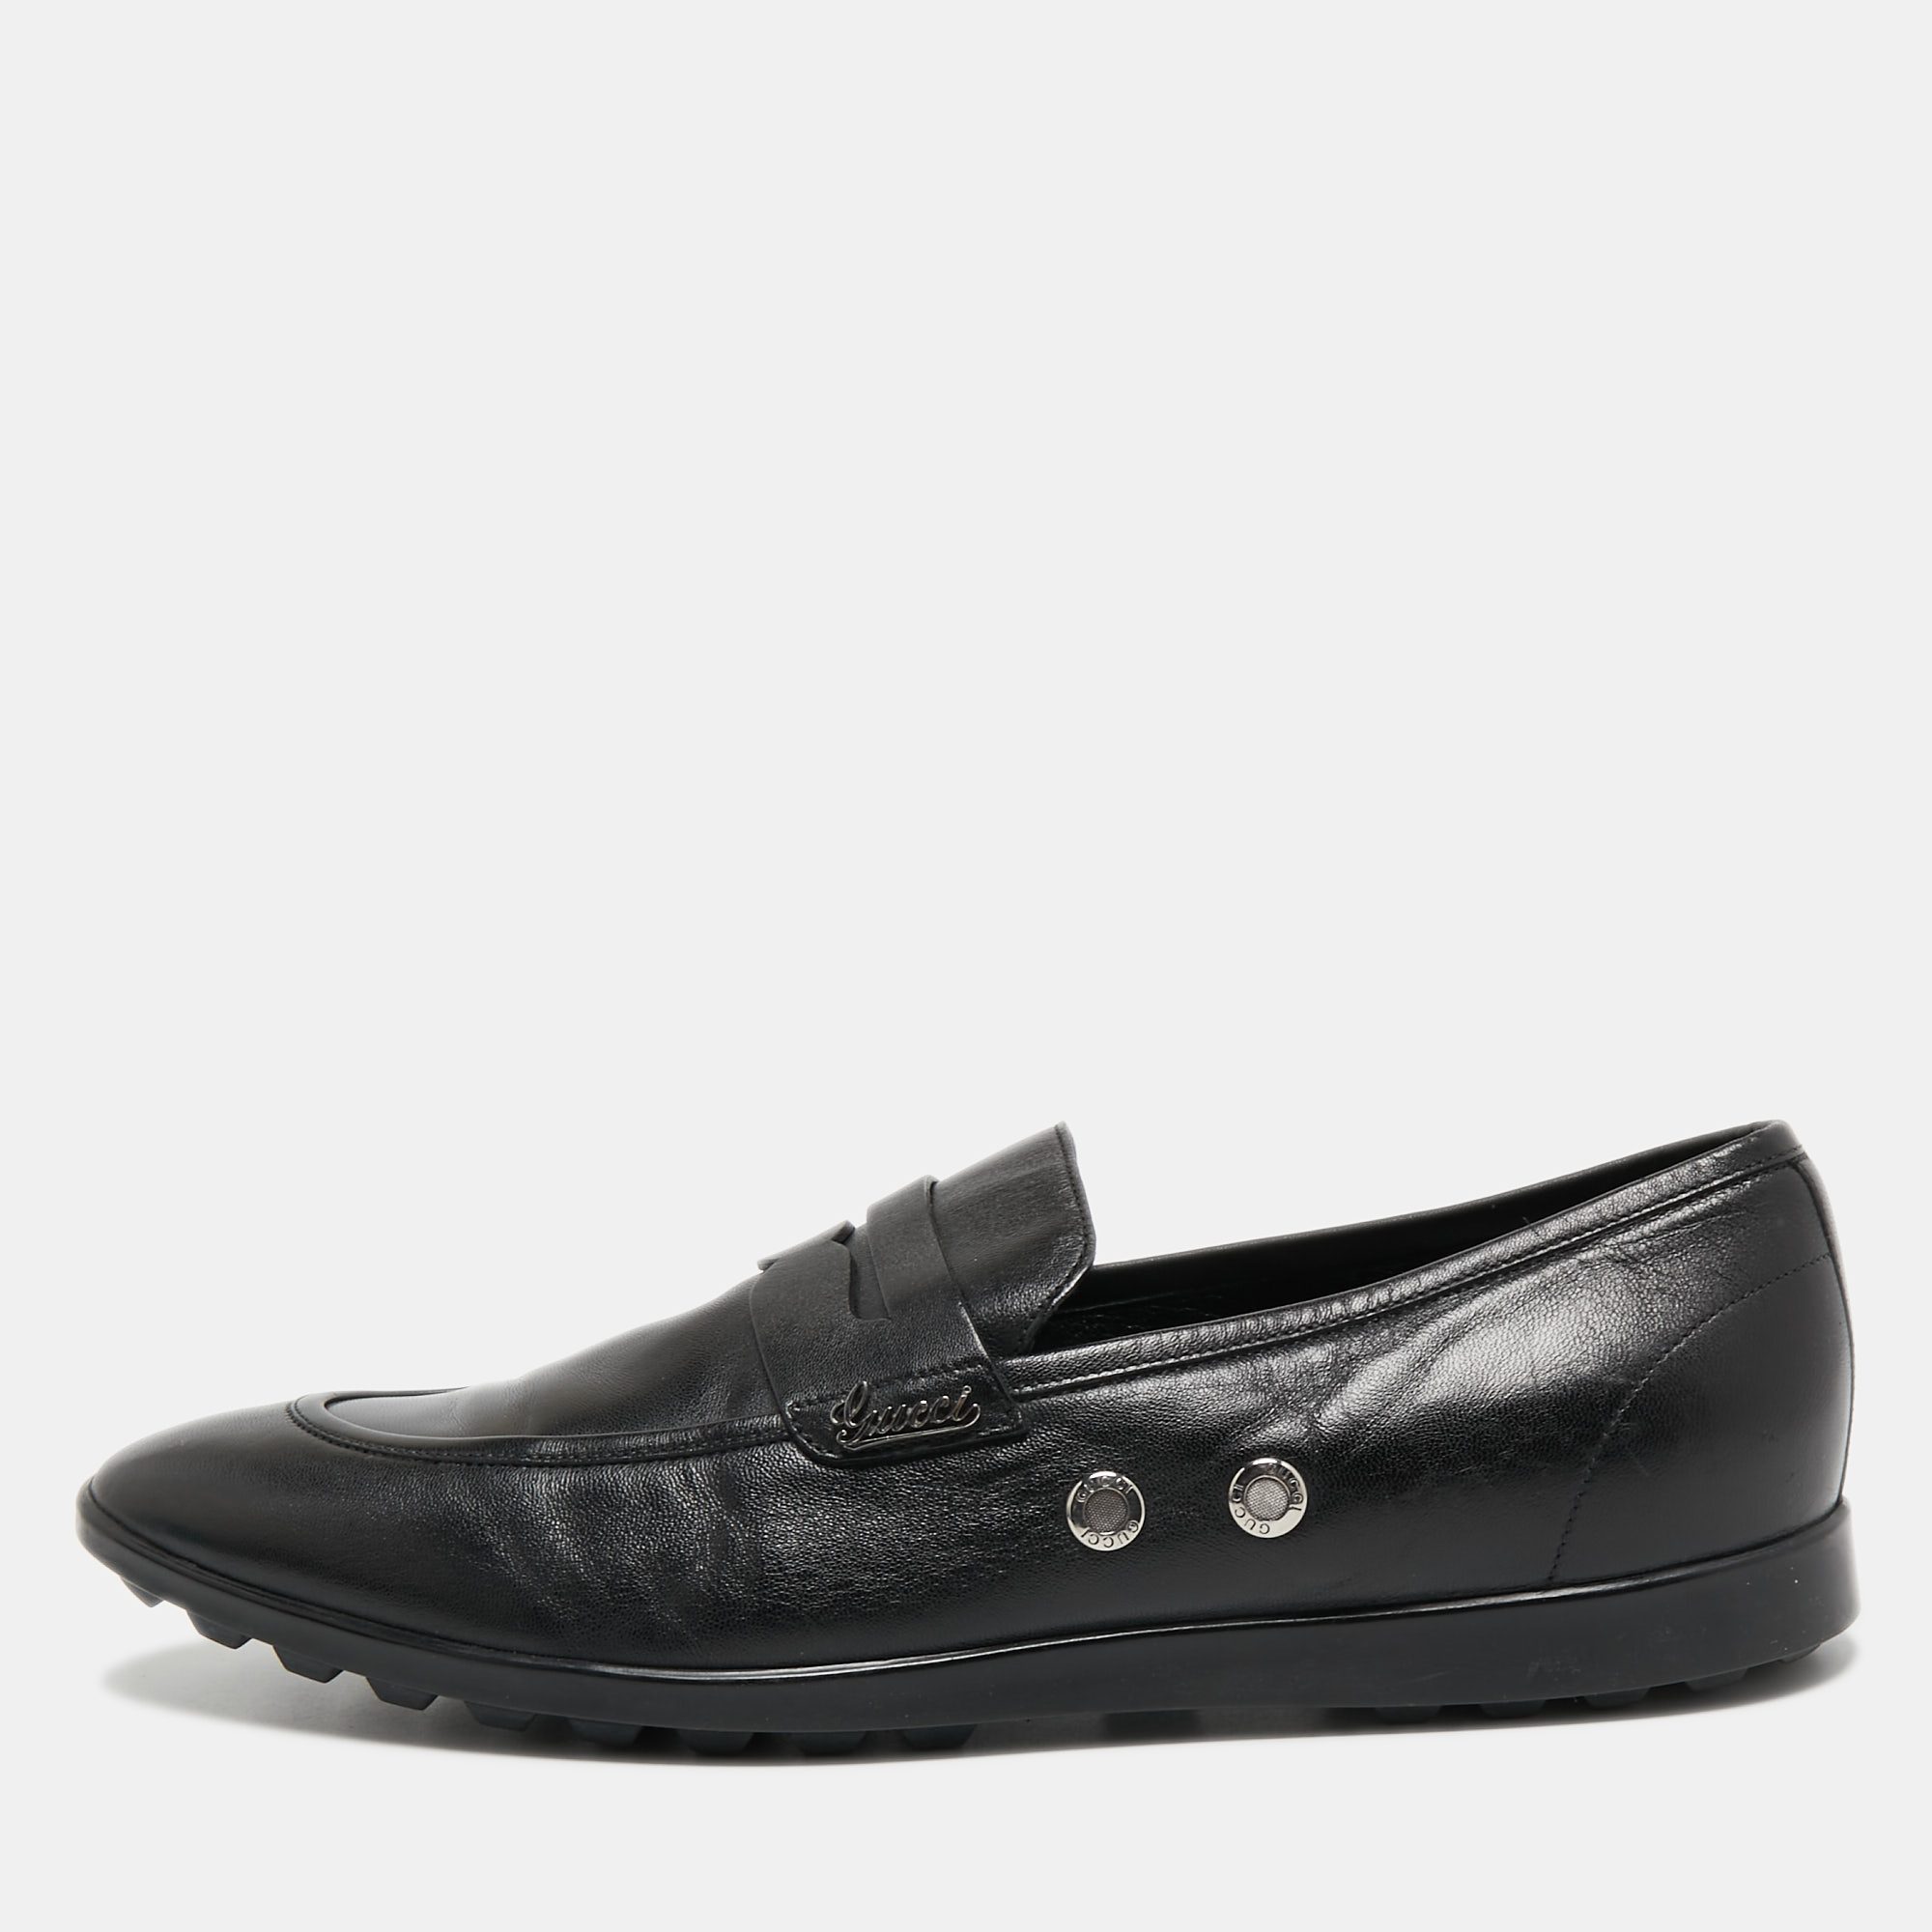 Pre-owned Gucci Black Leather Slip On Loafers Size 40.5